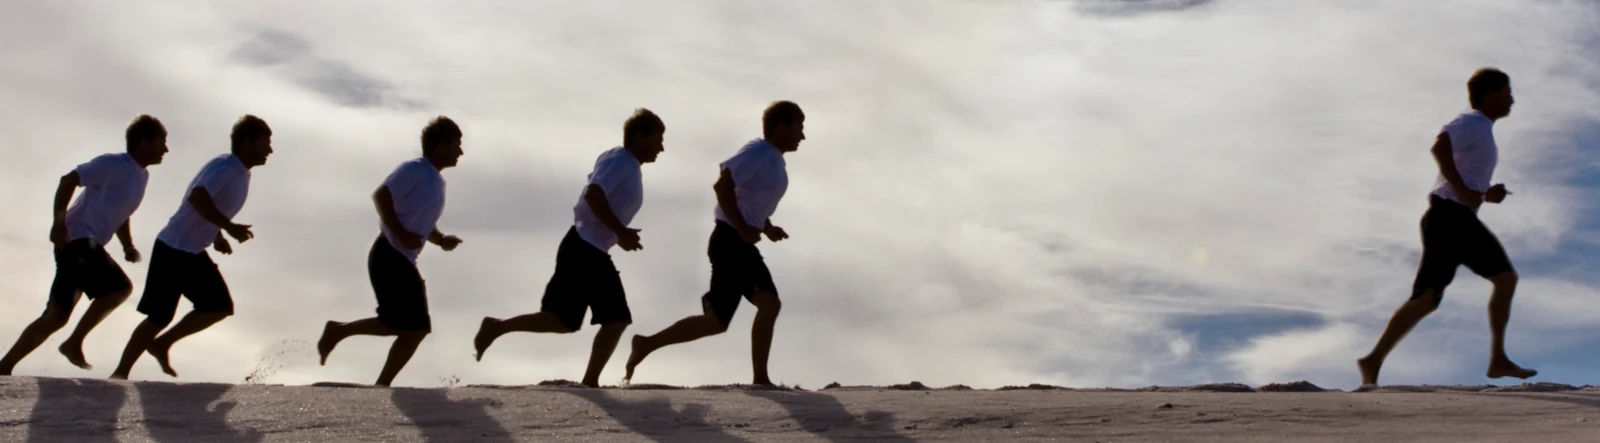 People running in a single file on sand